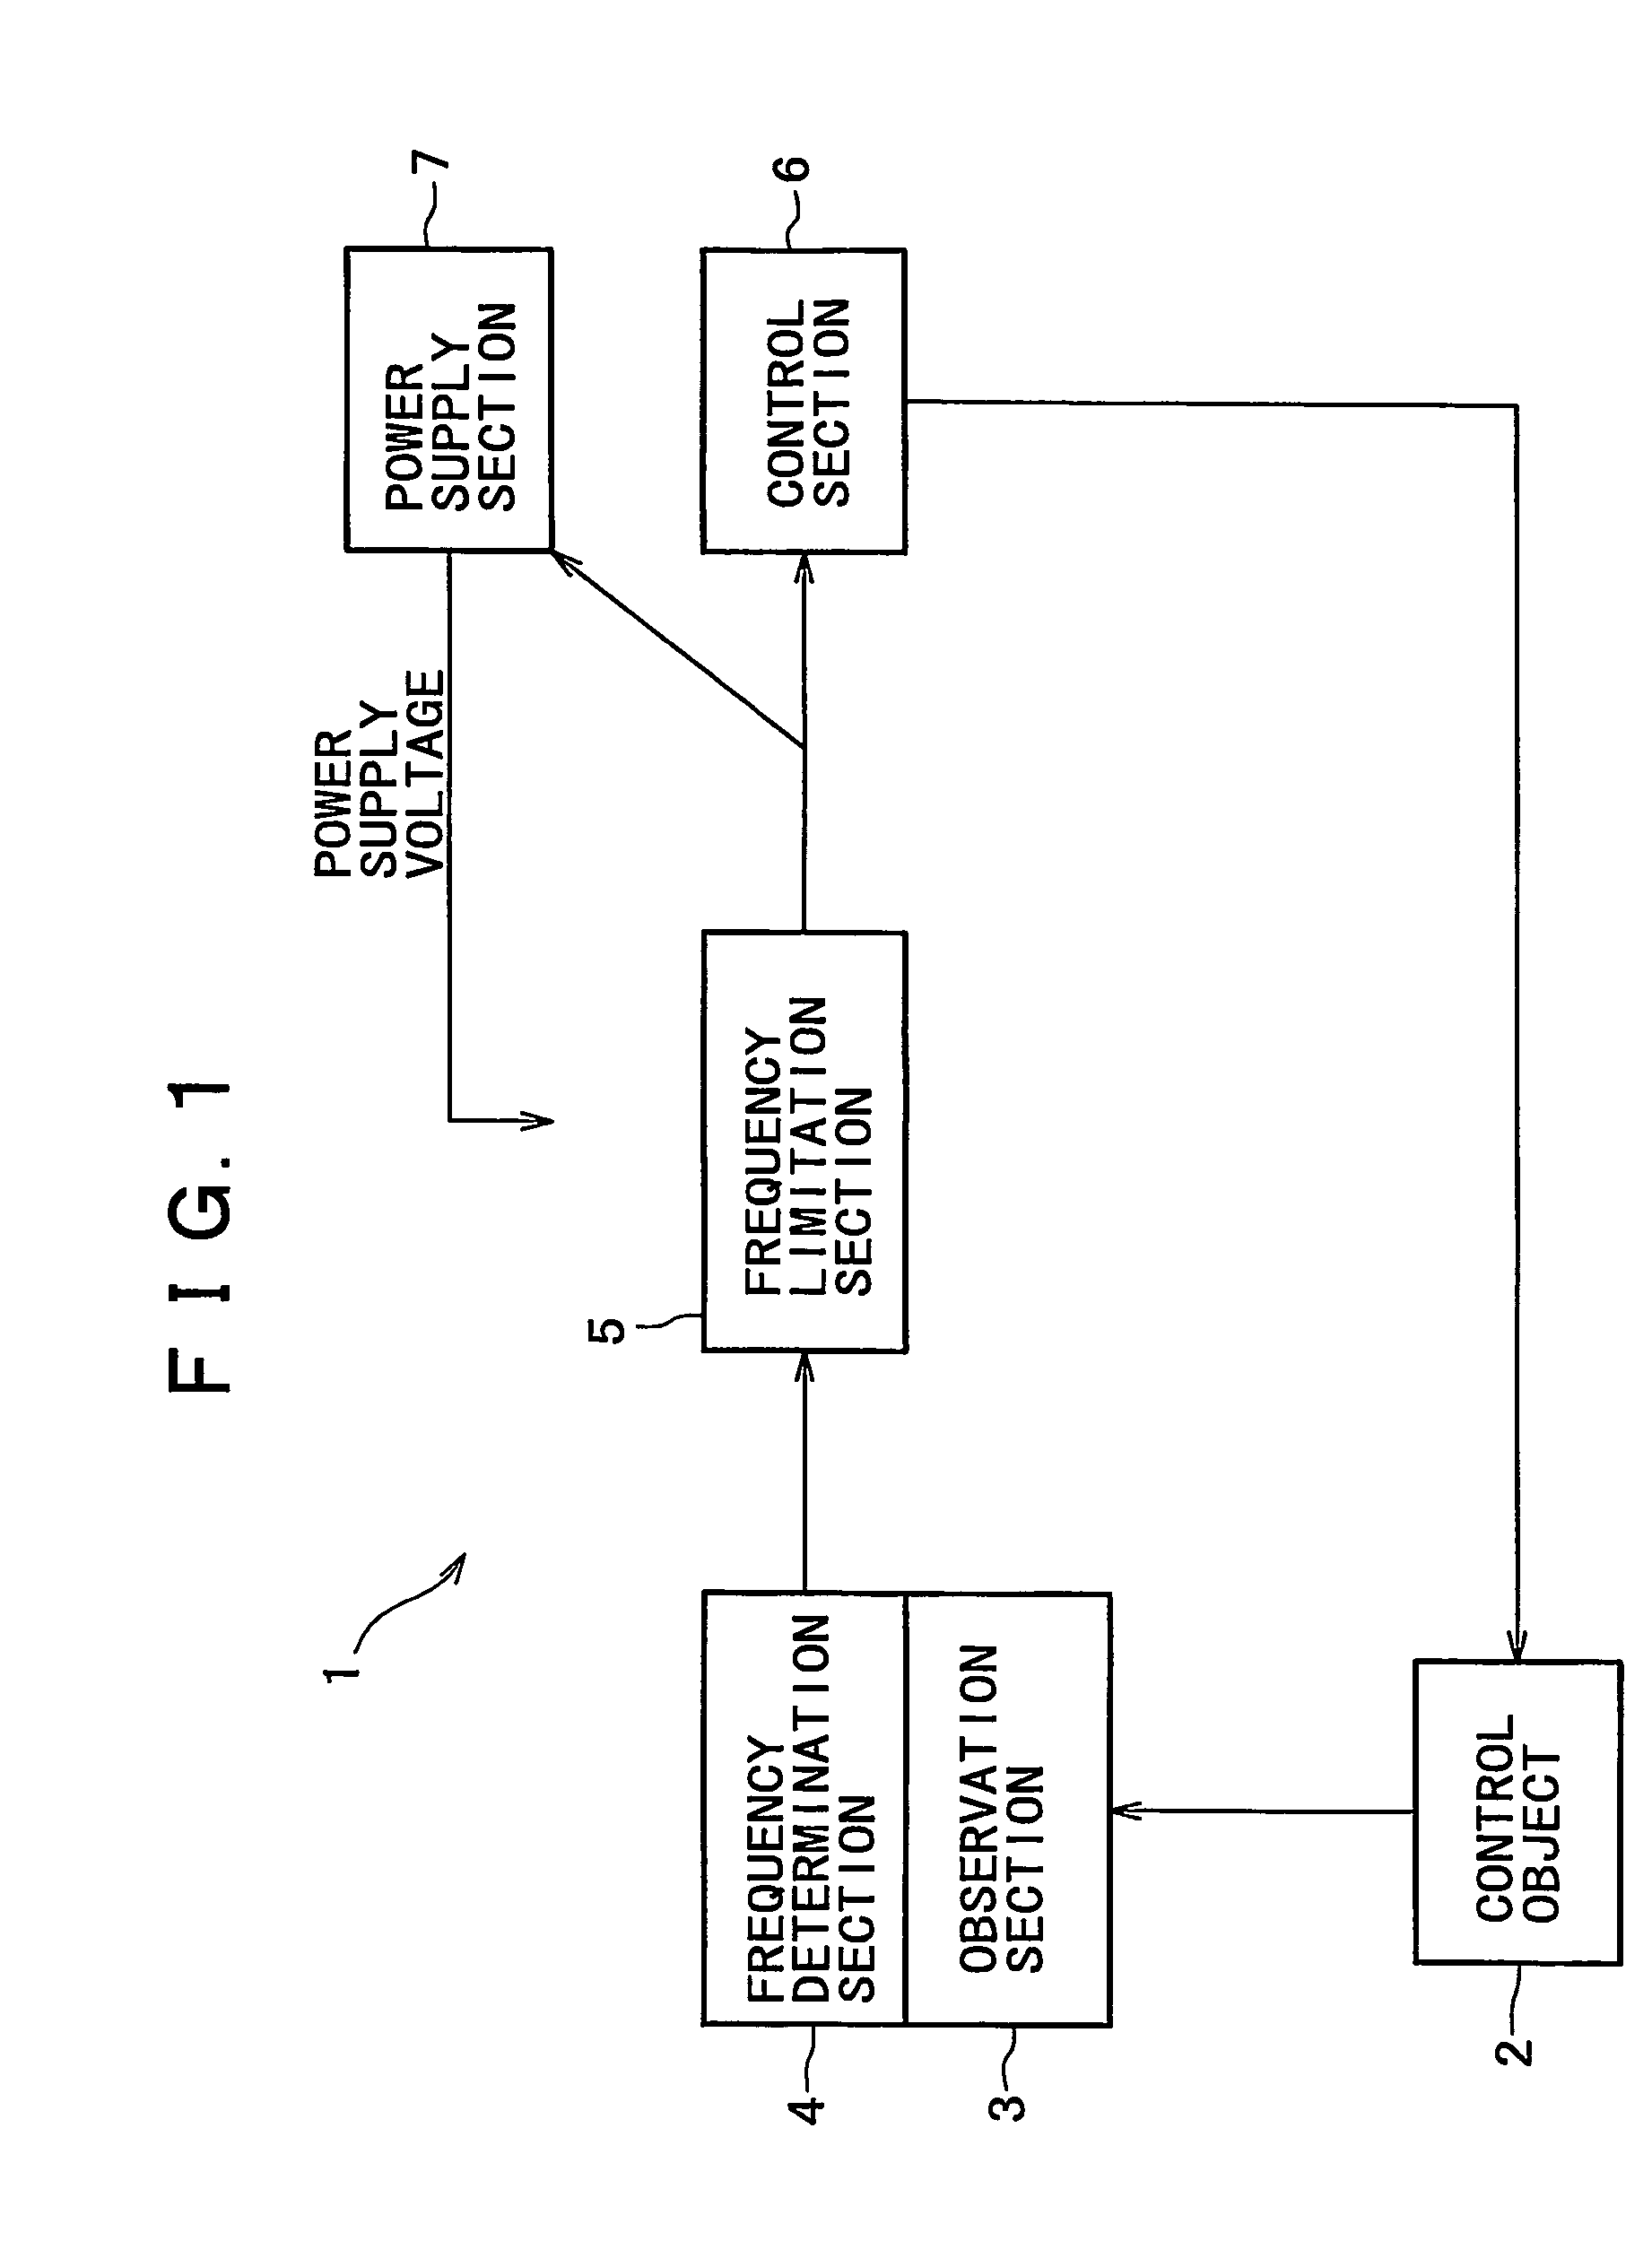 Frequency control apparatus for controlling the operation frequency of an object